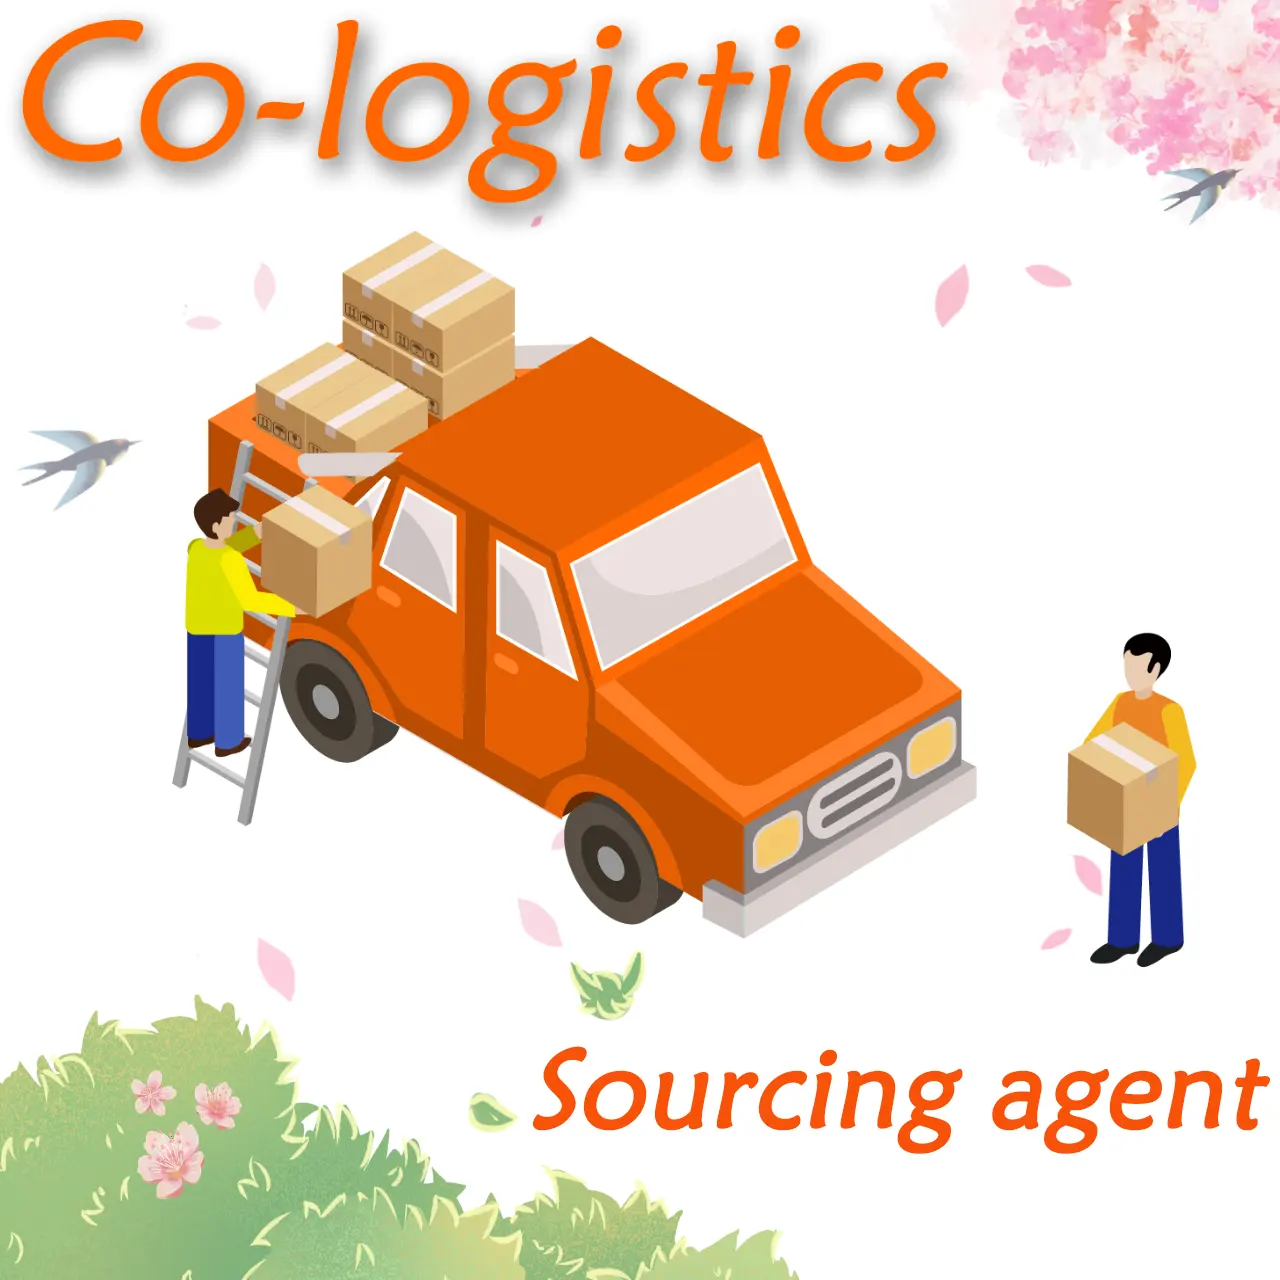 Forwarding Service Cheap/fast Sourcing Agent Best Shipping Freight Forwarder Sourcing Service From China With Cheapest Price To Abroad